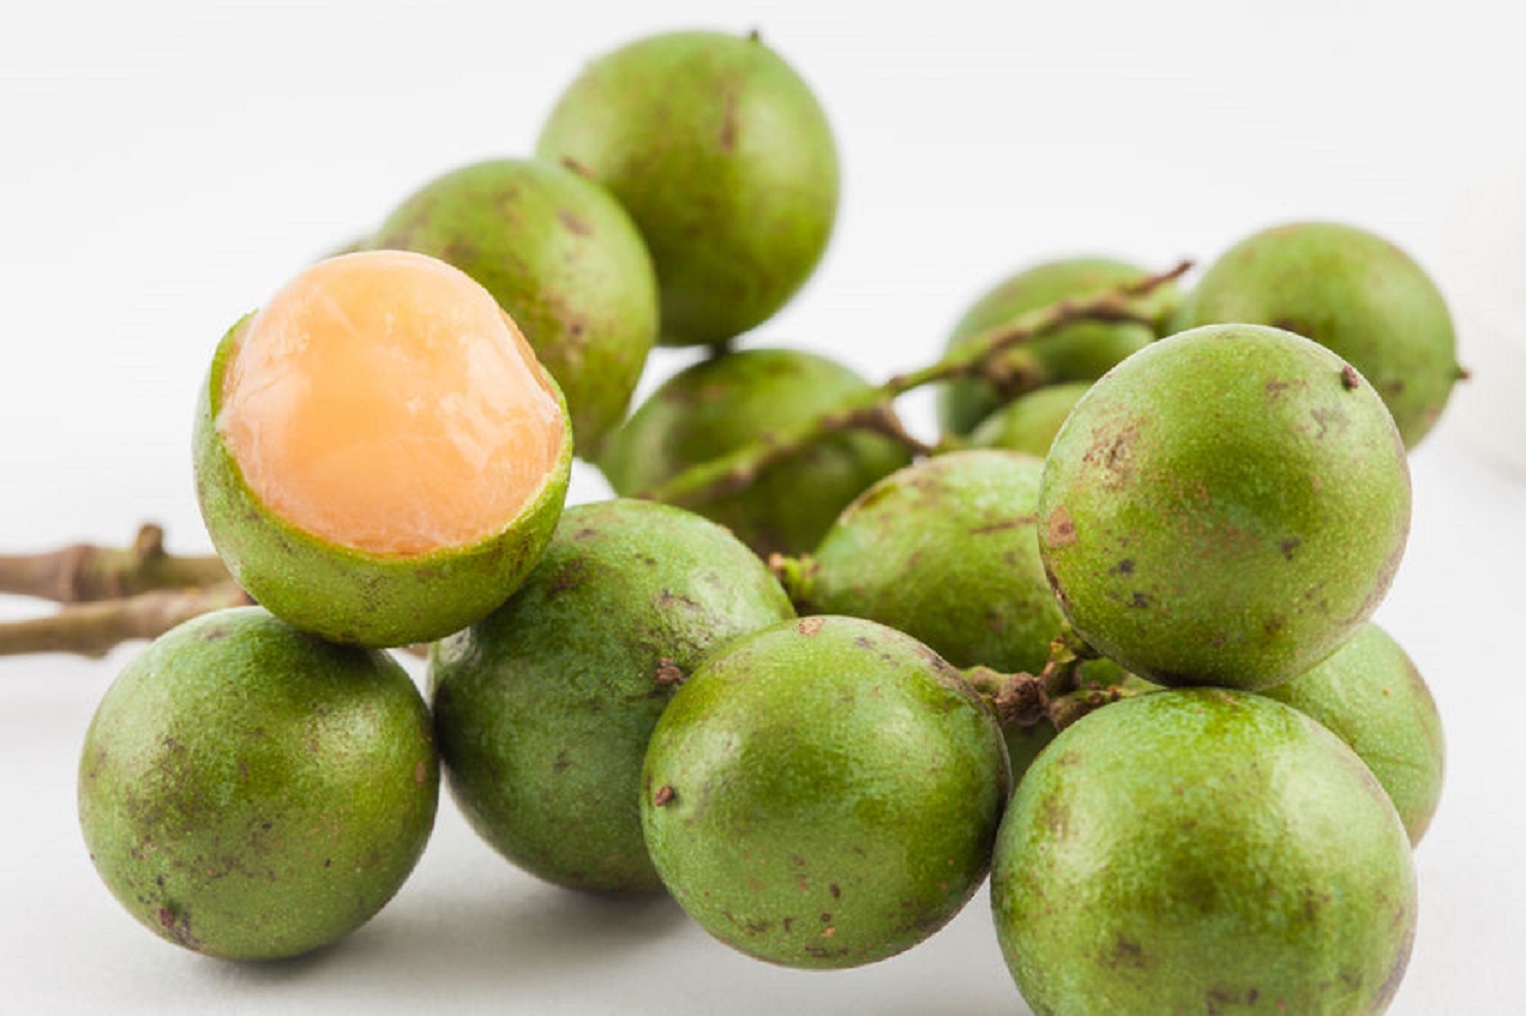 <p> Guinep, also known as Spanish lime, is a small, green fruit with a sweet and tangy flavor. The fruit is typically eaten fresh by popping the skin and sucking on the juicy flesh. It's a popular street food in Jamaica, especially during the summer months. The refreshing taste of guinep is perfect for hot, sunny days. </p> :: Jamaicans.com